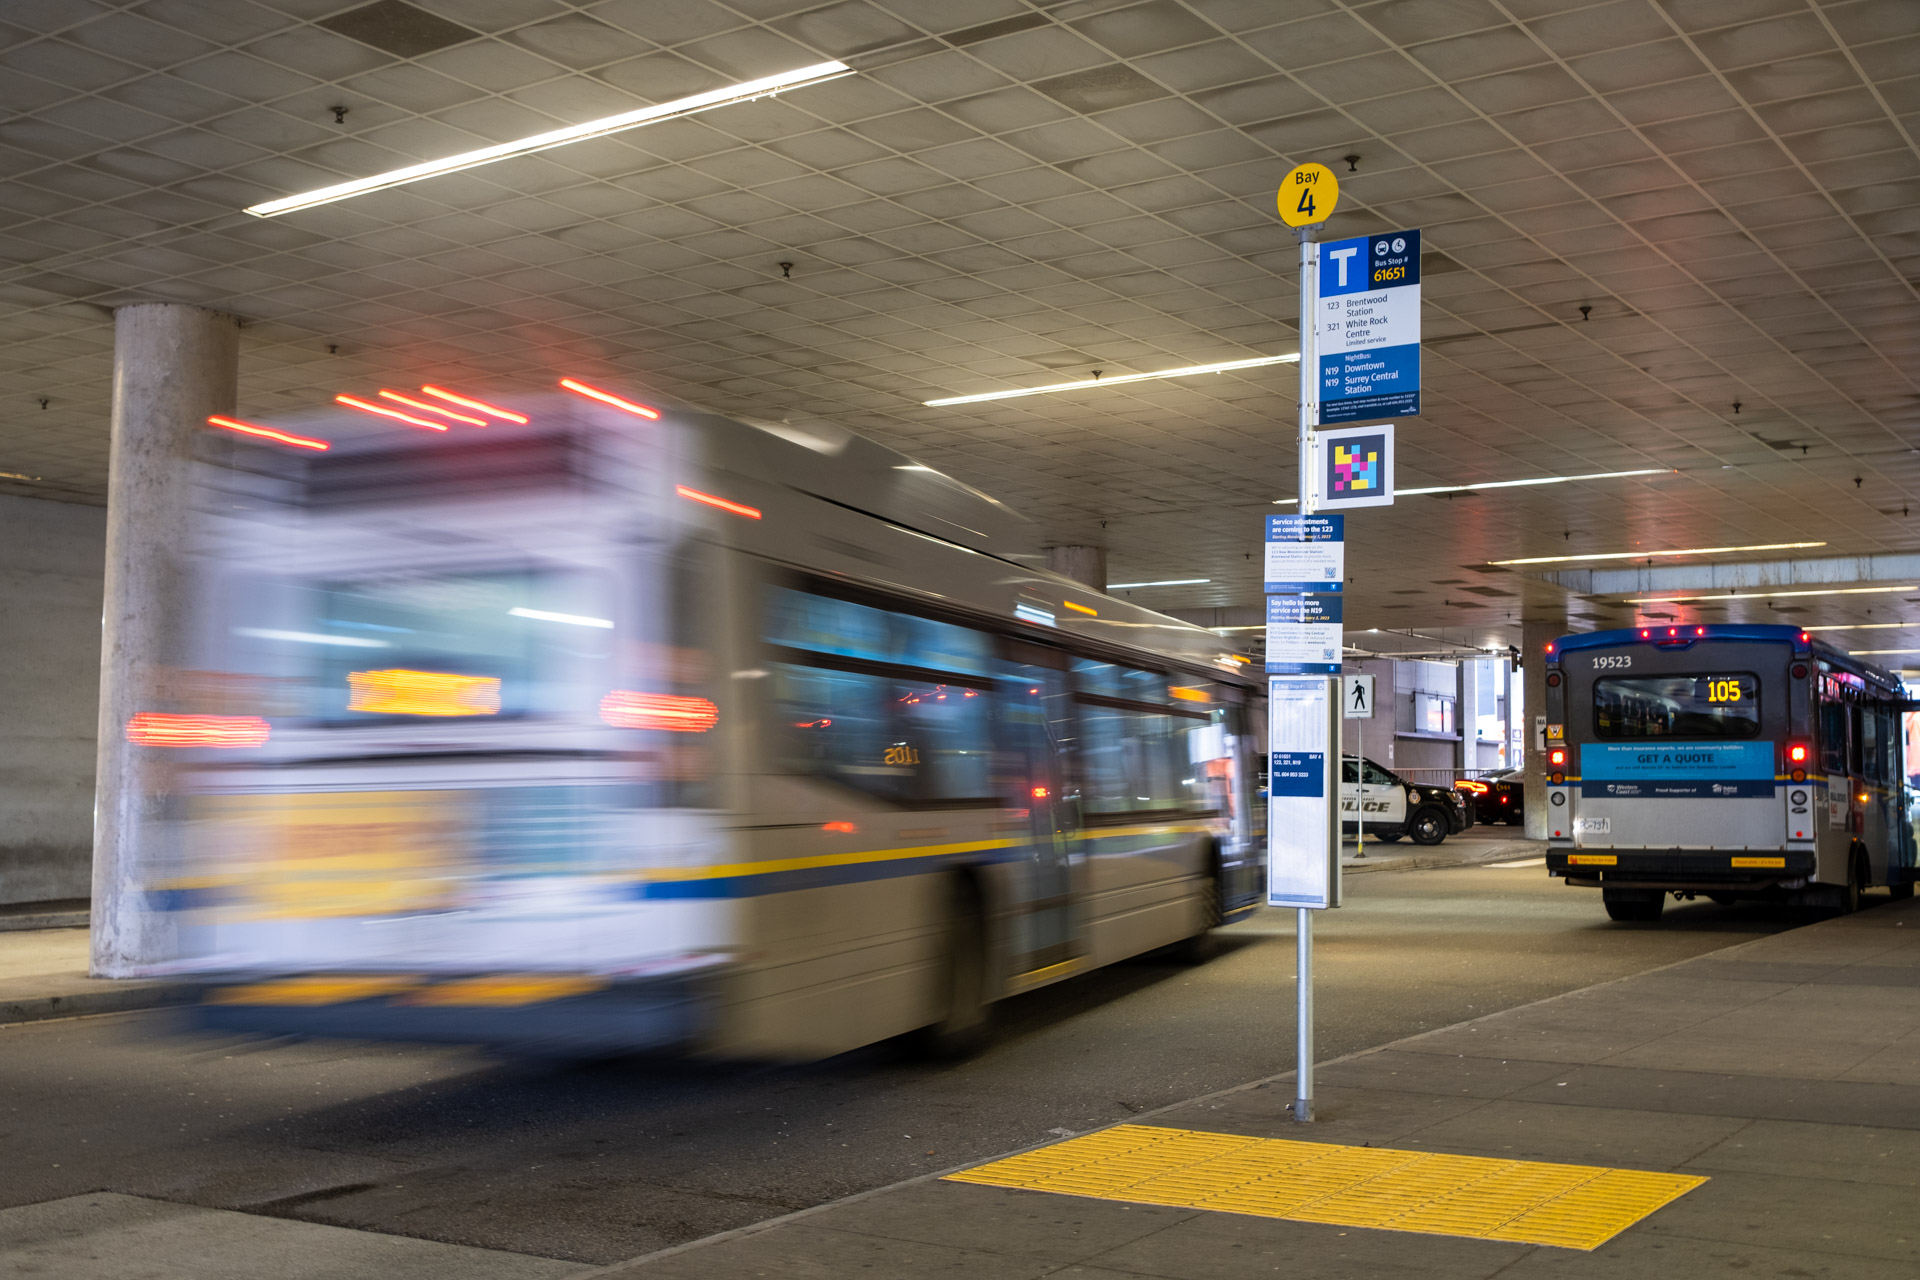 This is how TransLink is testing new navigation expertise